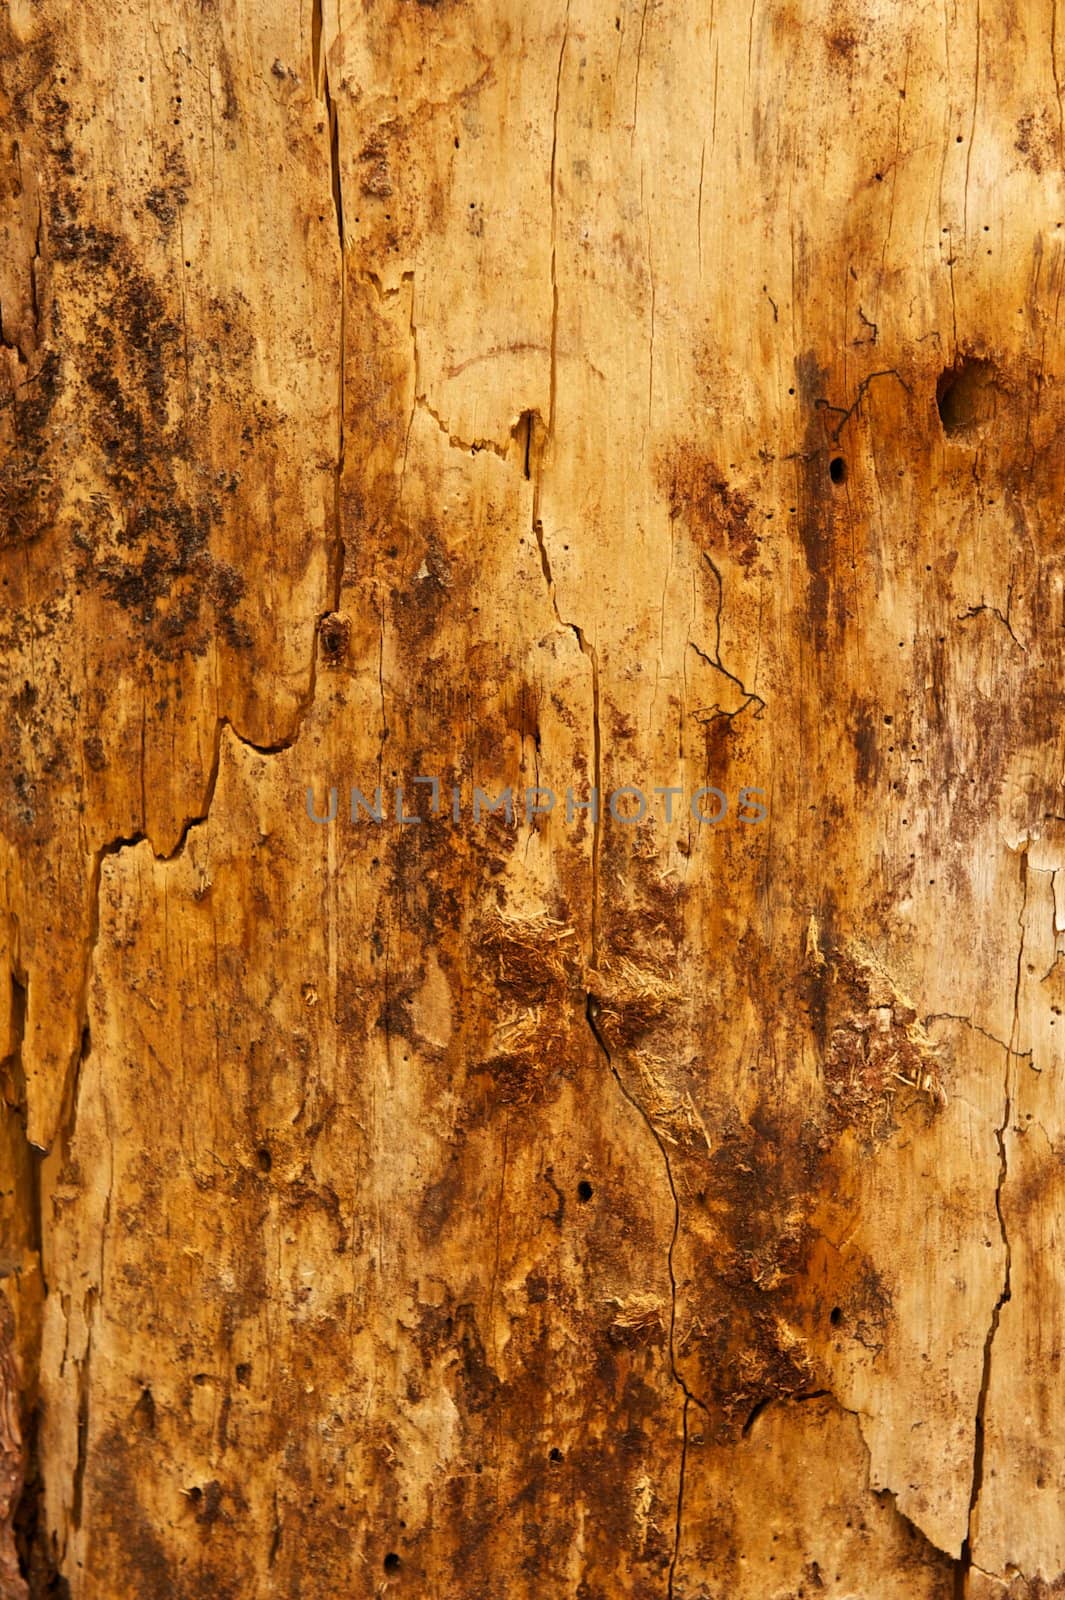 A dirty Ponderosa Pine tree stripped of its bark with cracks on its surface